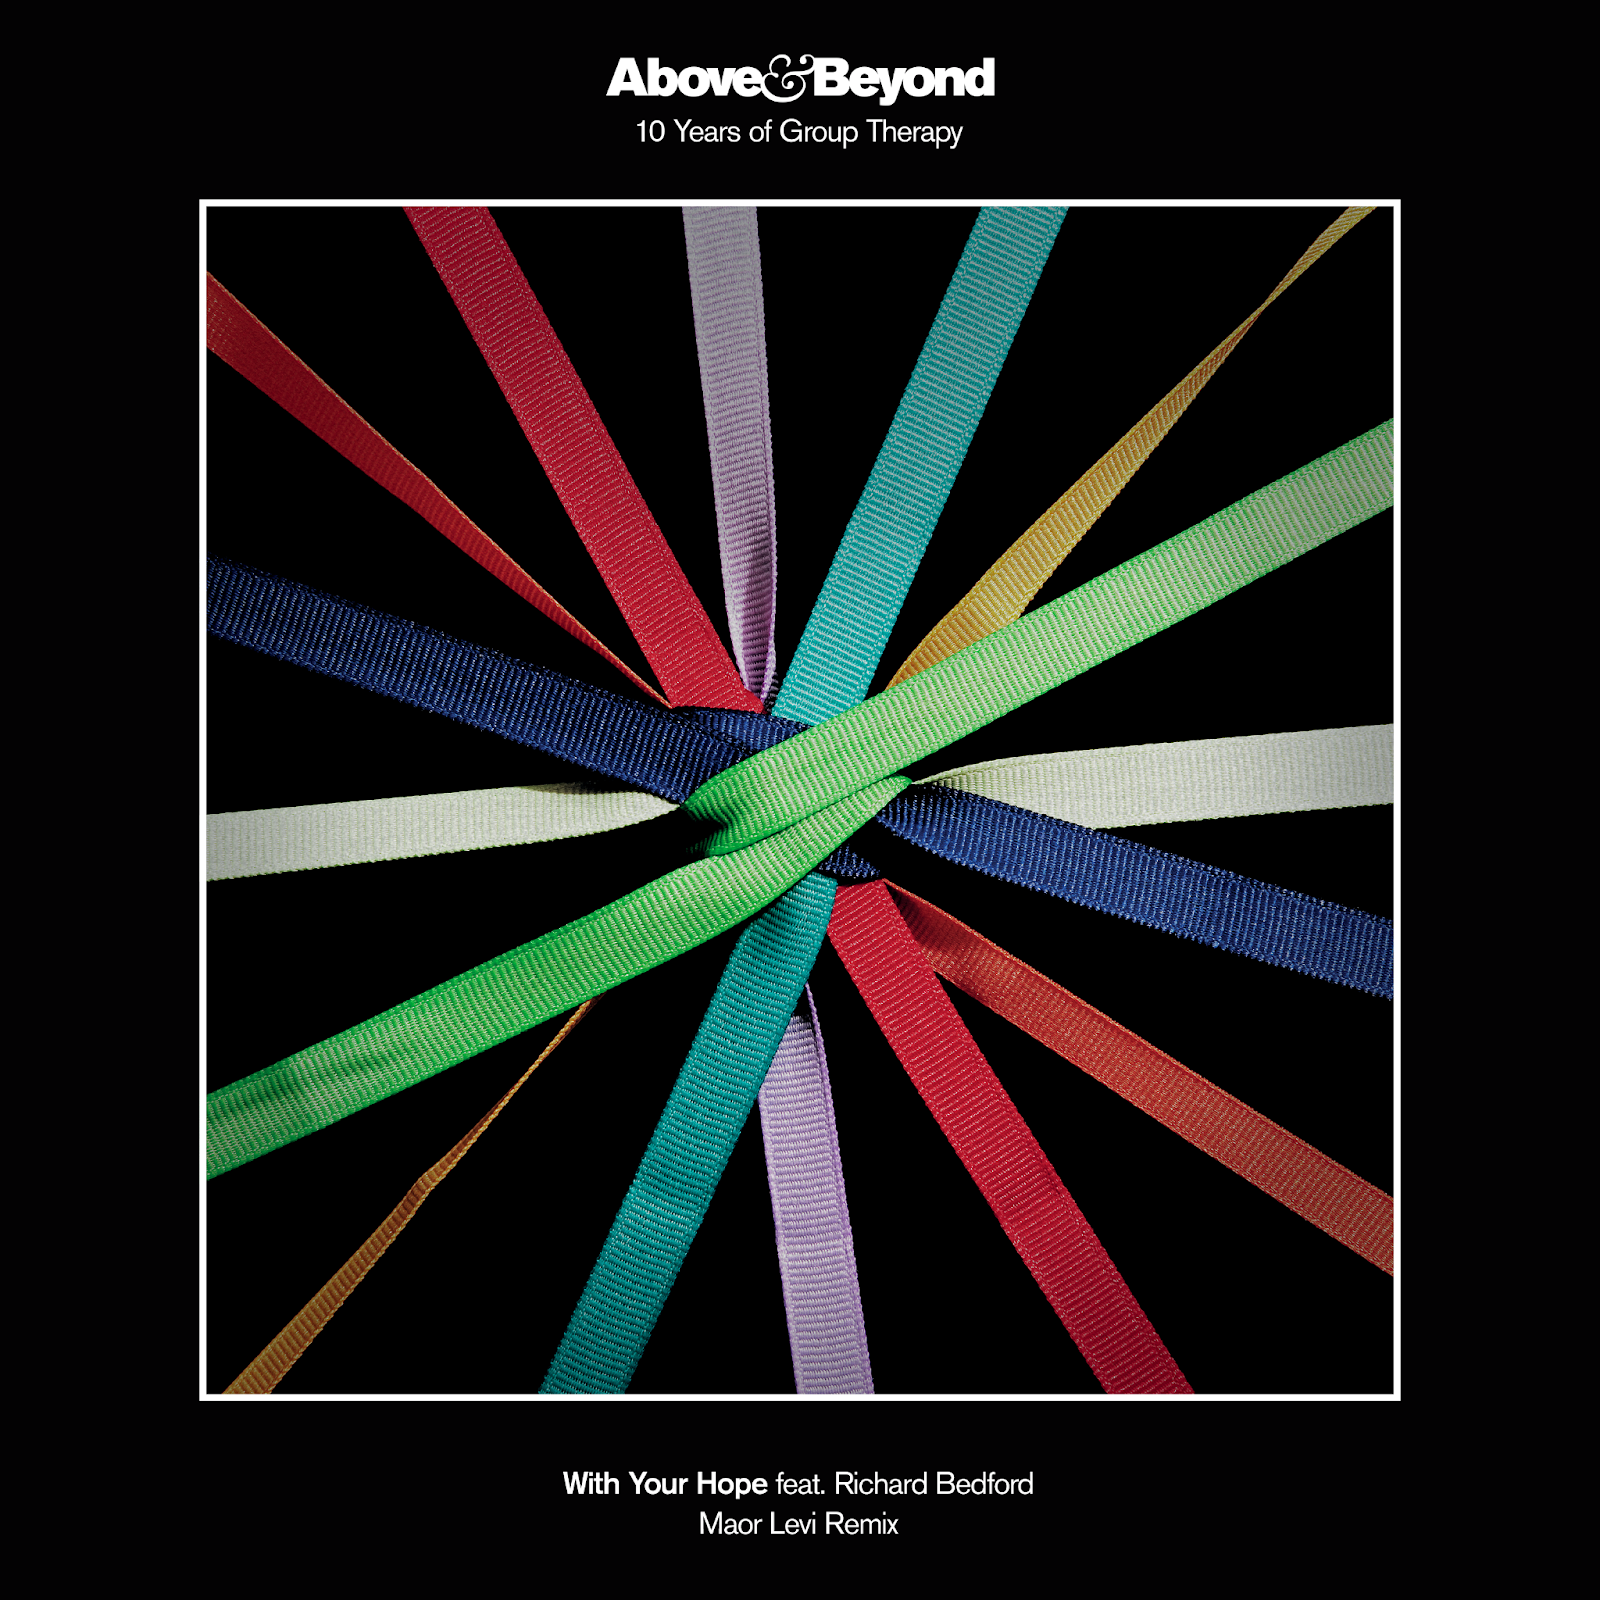 Above and Beyond feat. Richard Bedford presents With Your Hope (Maor Levi Remix) on Anjunabeats